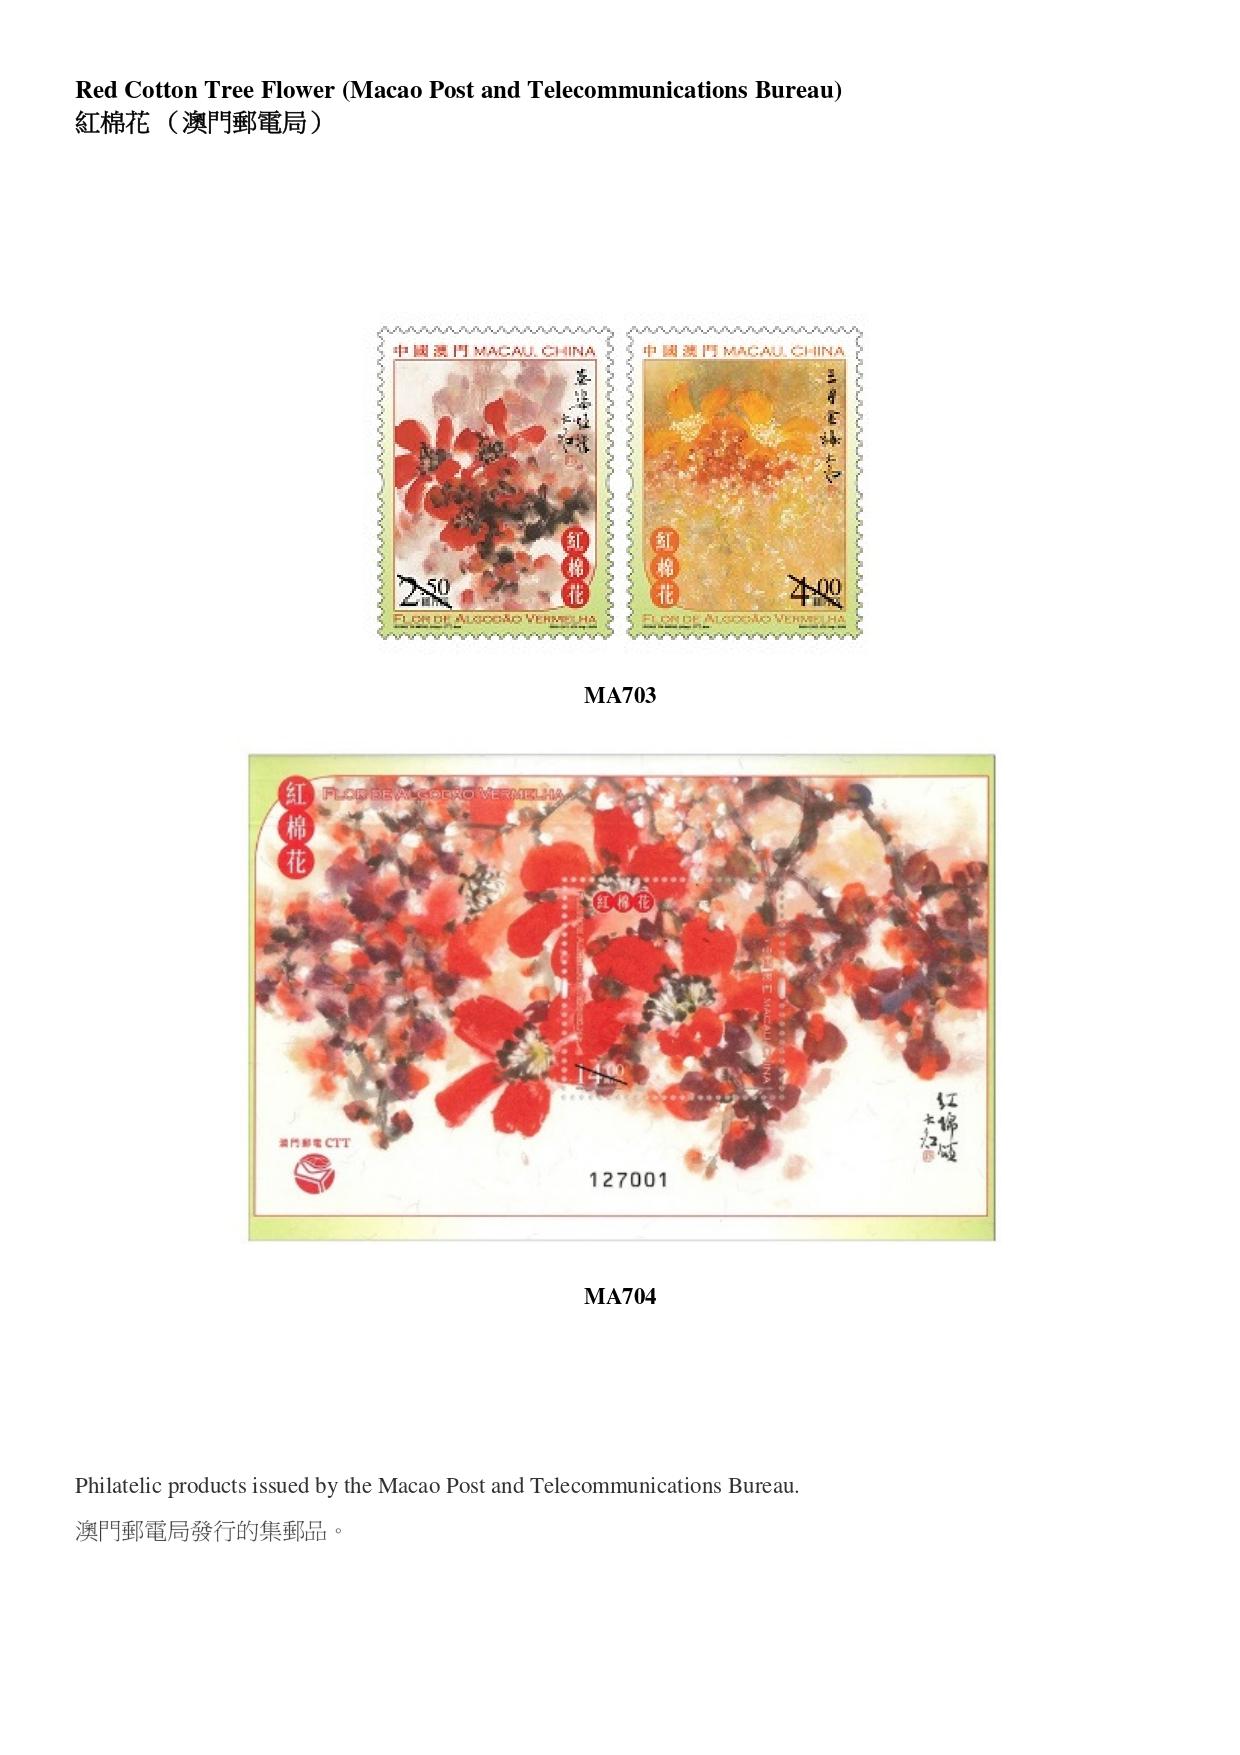 Hongkong Post announced today (September 13) the sale of Mainland, Macao and overseas philatelic products. Photo shows philatelic products issued by the Macao Post and Telecommunications Bureau.